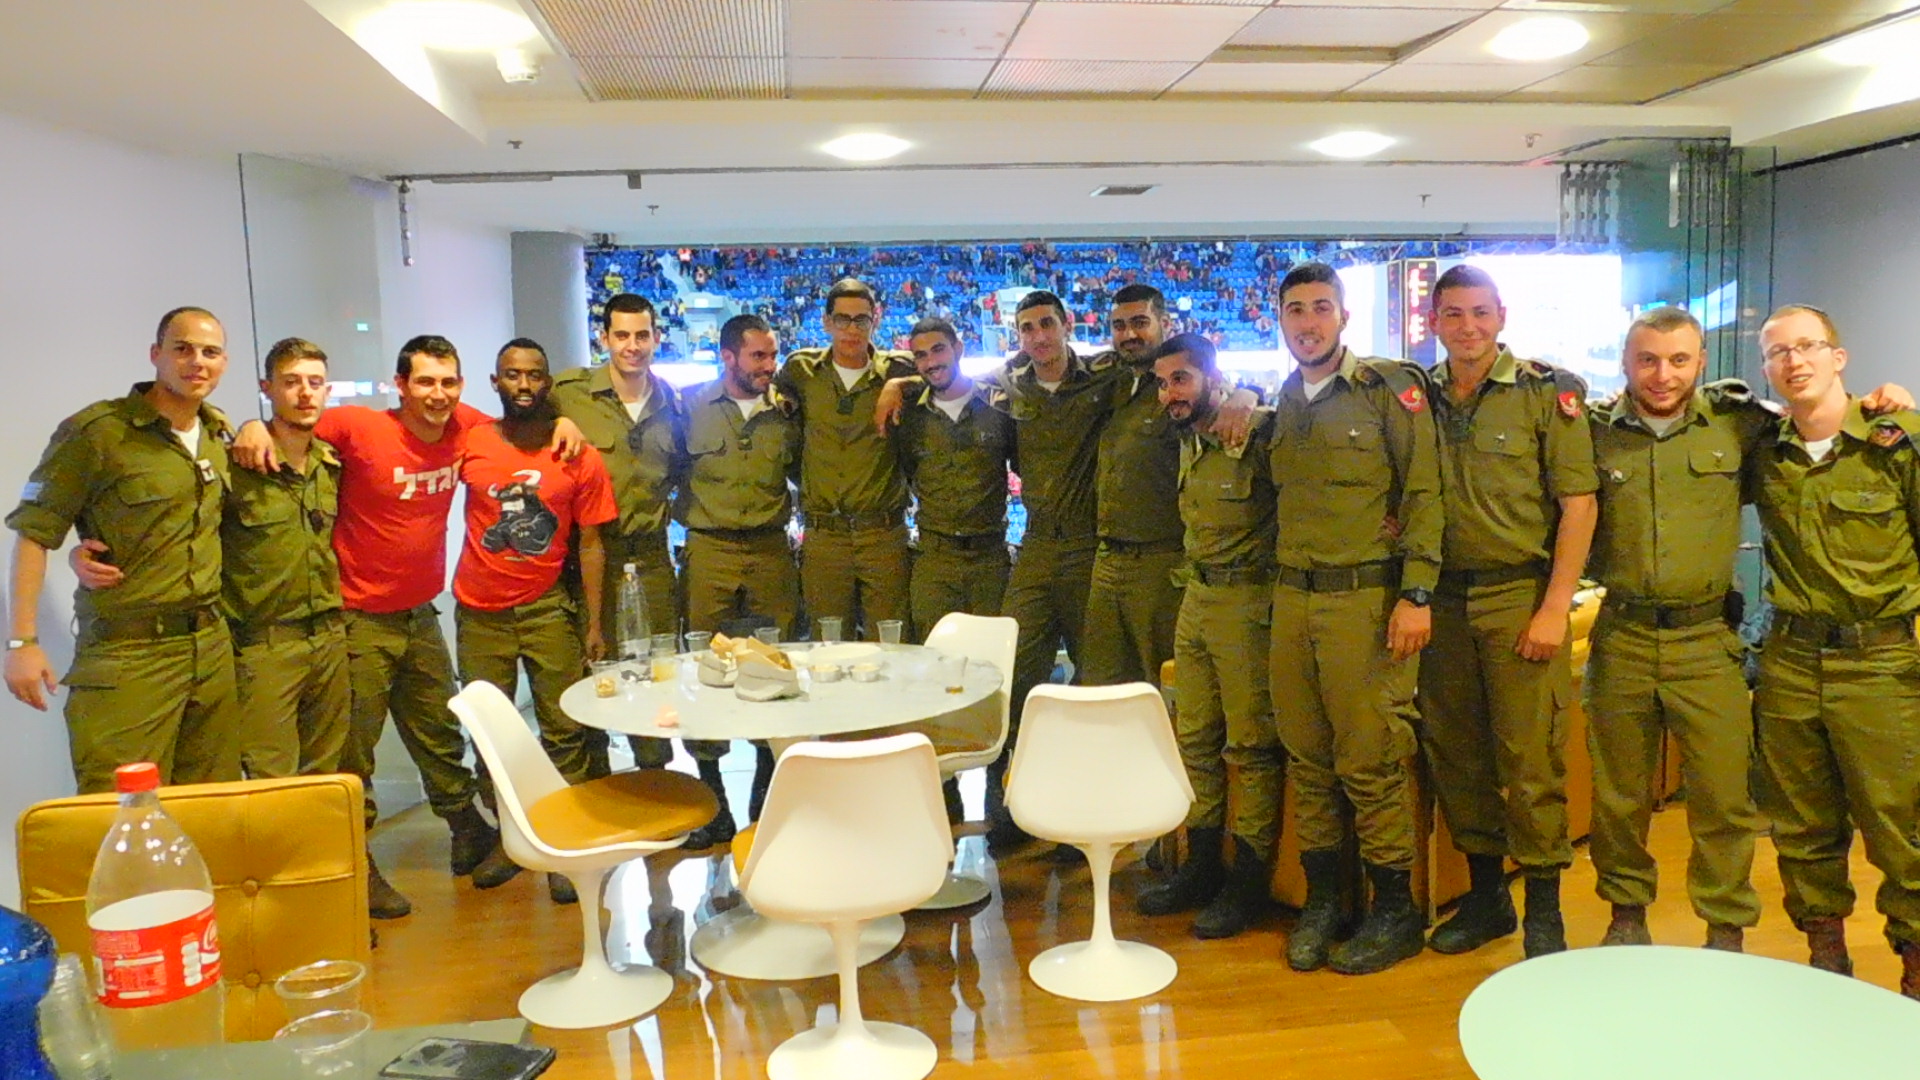 A group of IDF soldiers pose in the VIP box at a sport stadium.